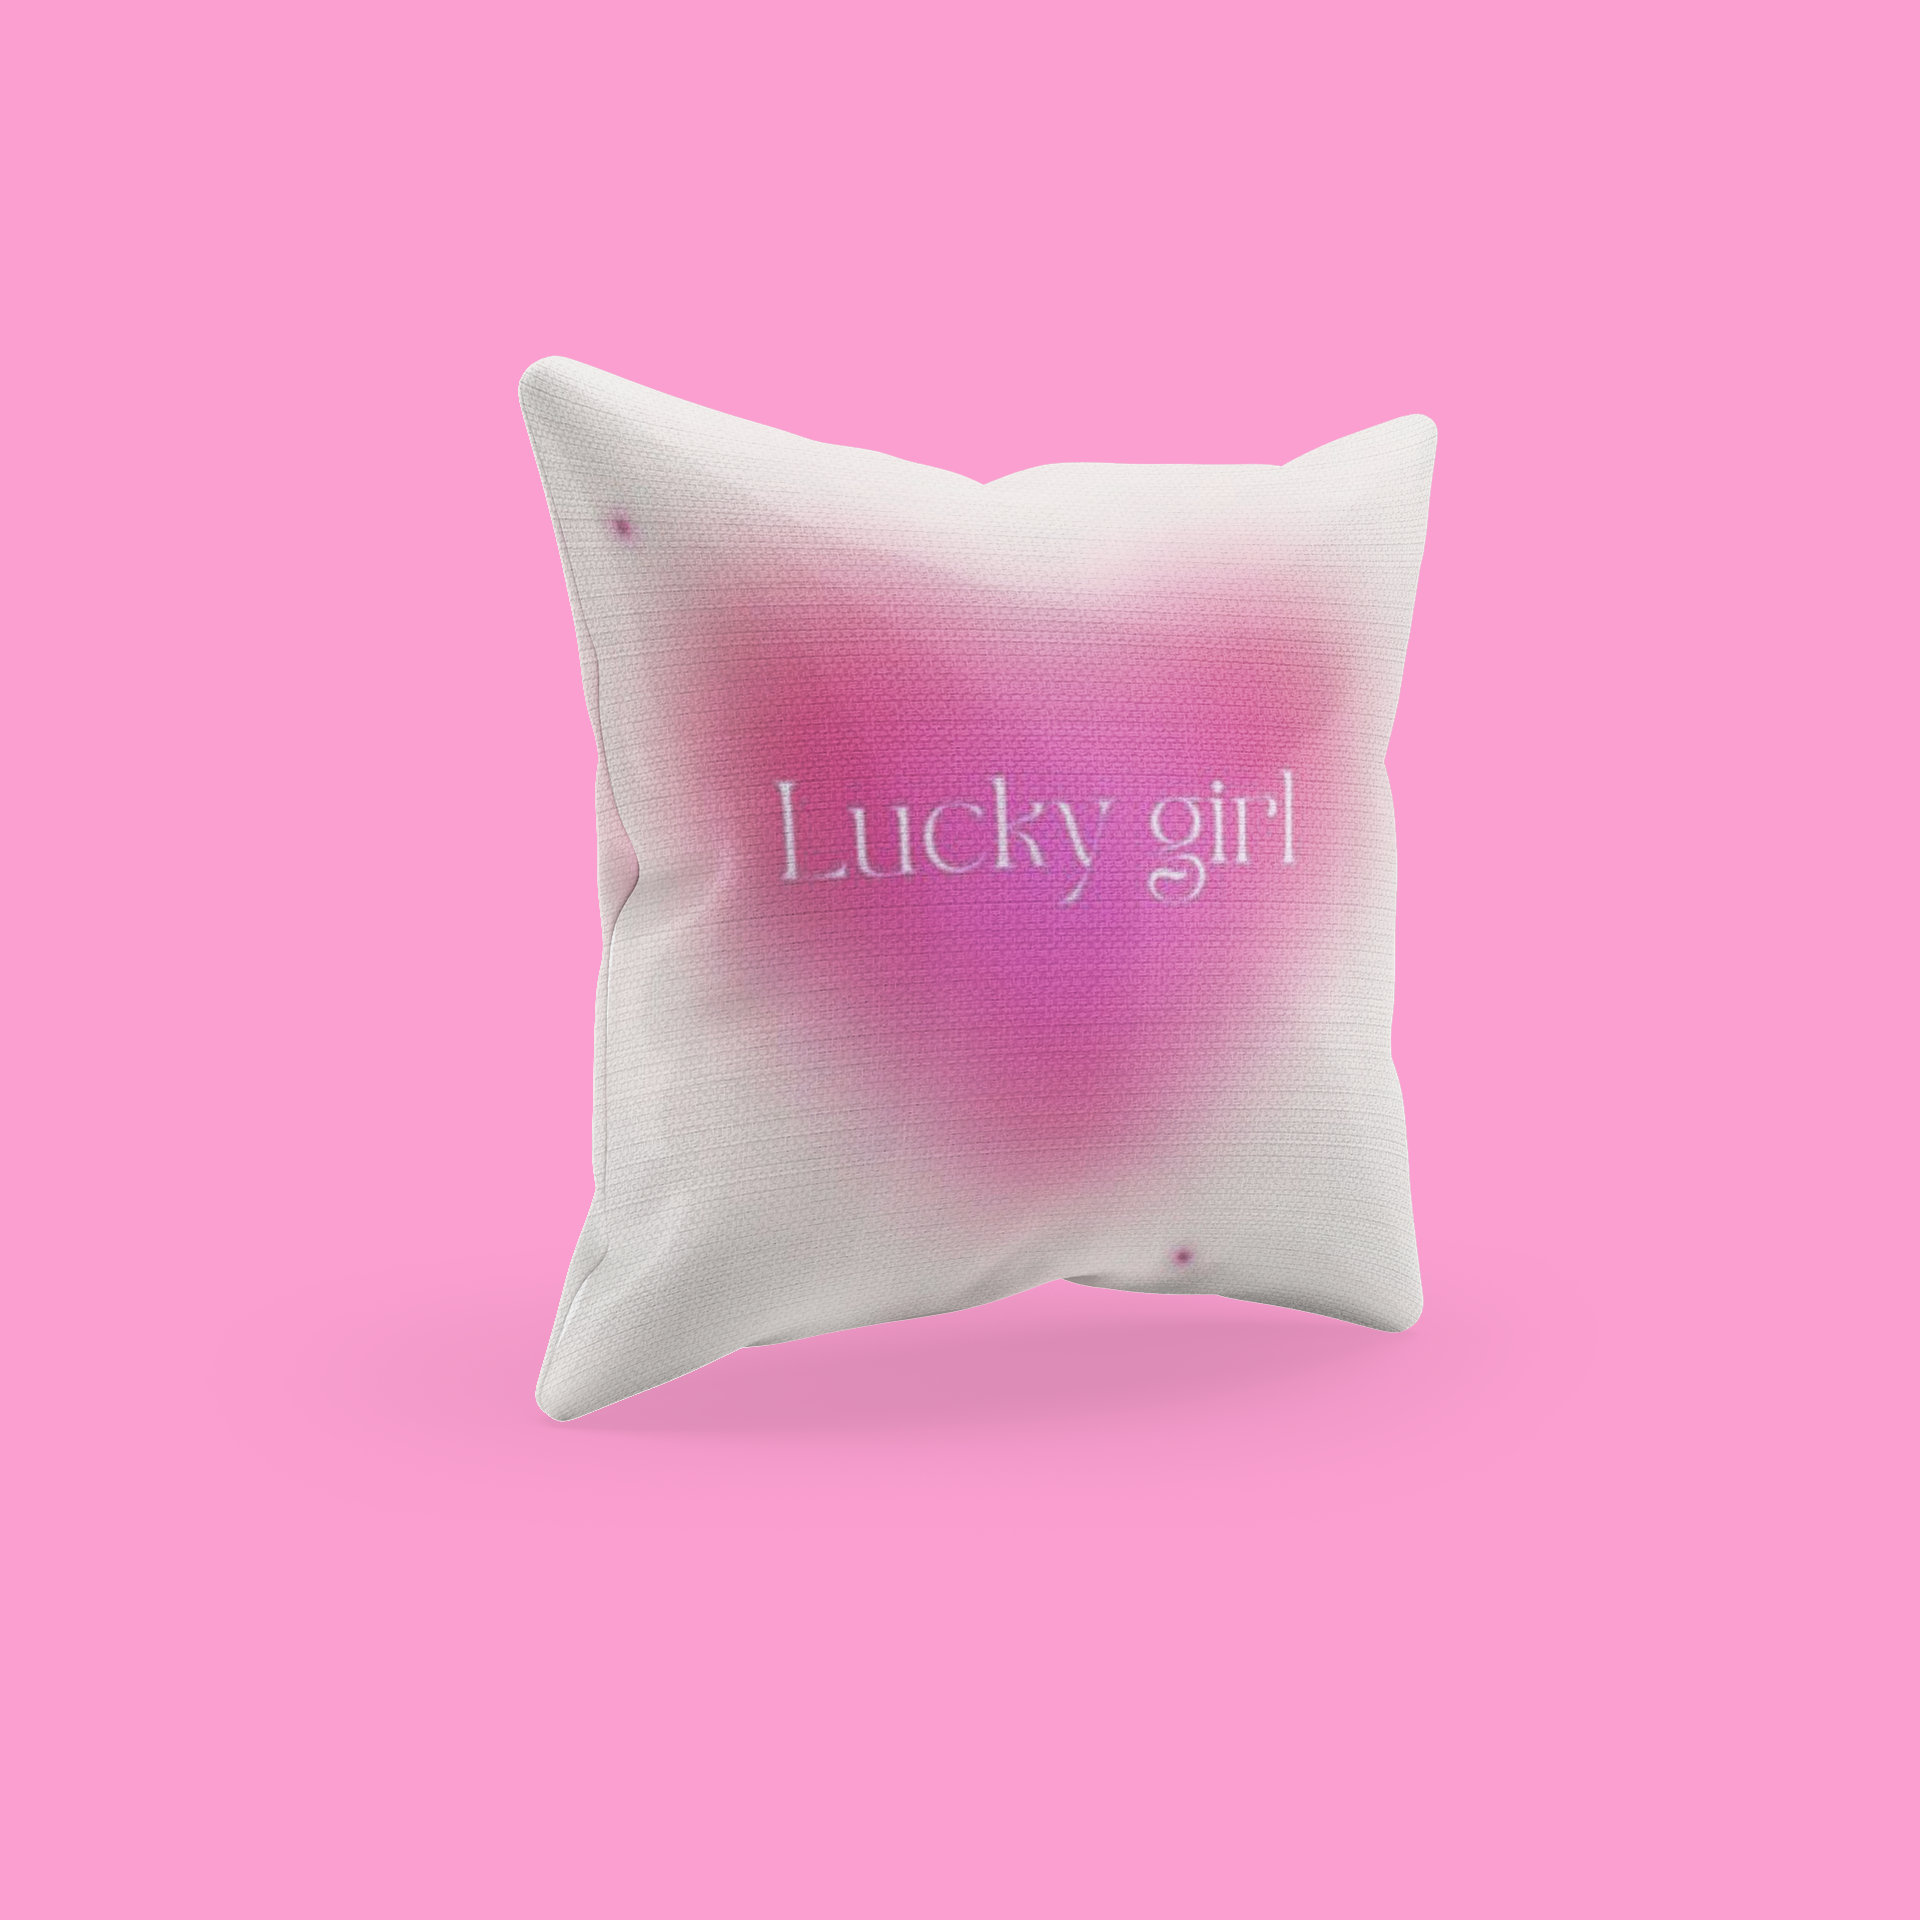 "Lucky Girl" Y2K Fashion Square Pillow for Girly Room Decor